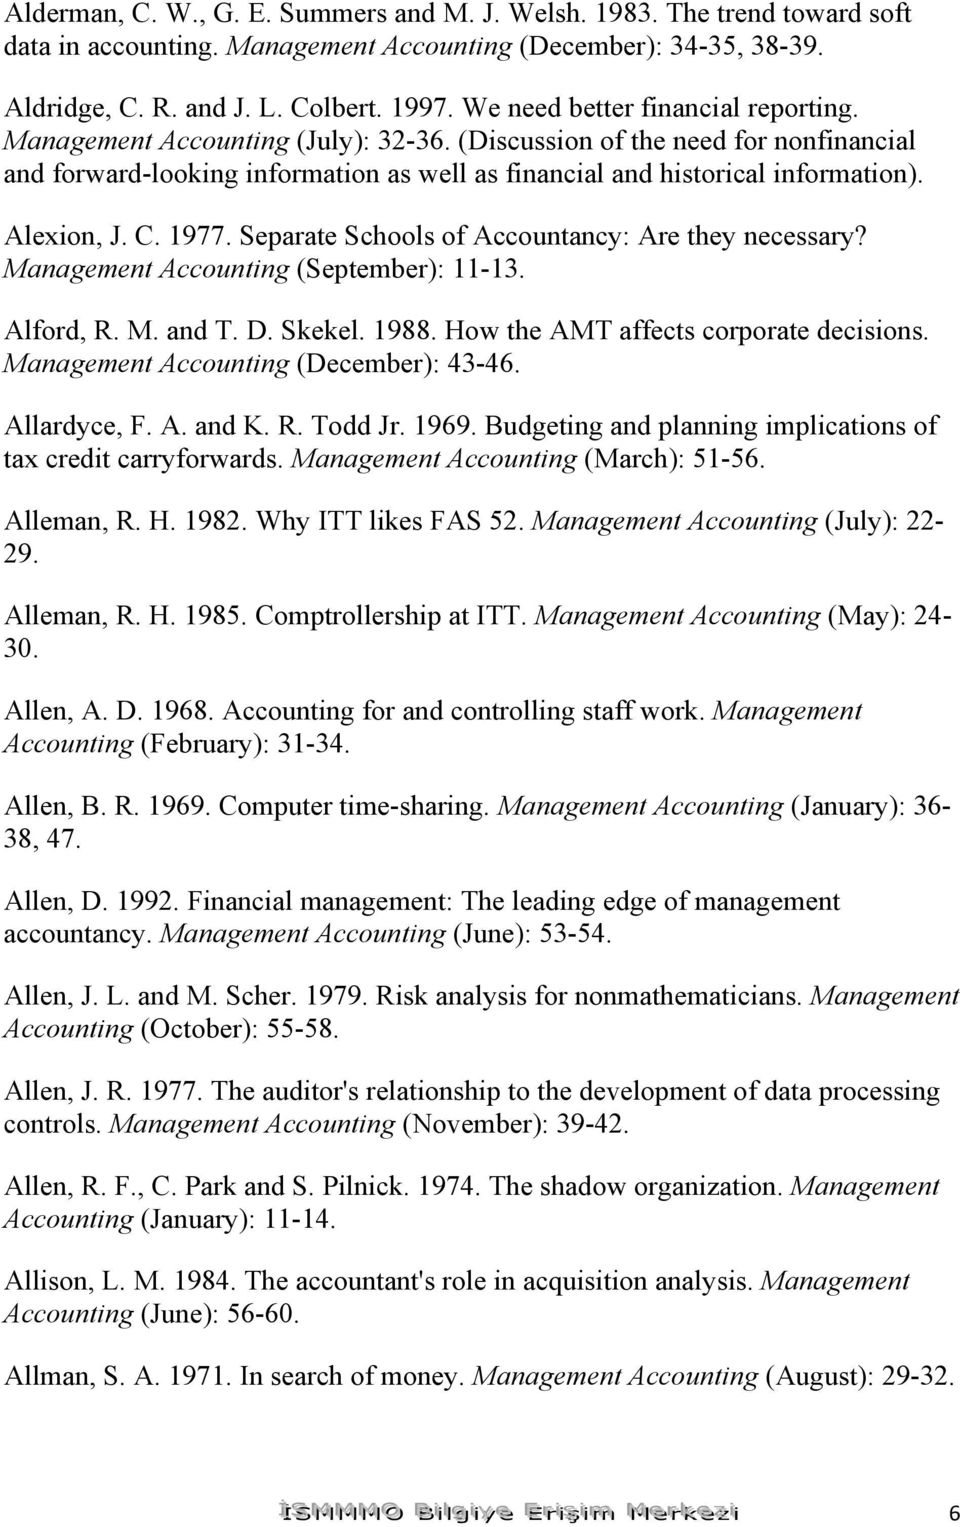 Alexion, J. C. 1977. Separate Schools of Accountancy: Are they necessary? Management Accounting (September): 11-13. Alford, R. M. and T. D. Skekel. 1988. How the AMT affects corporate decisions.